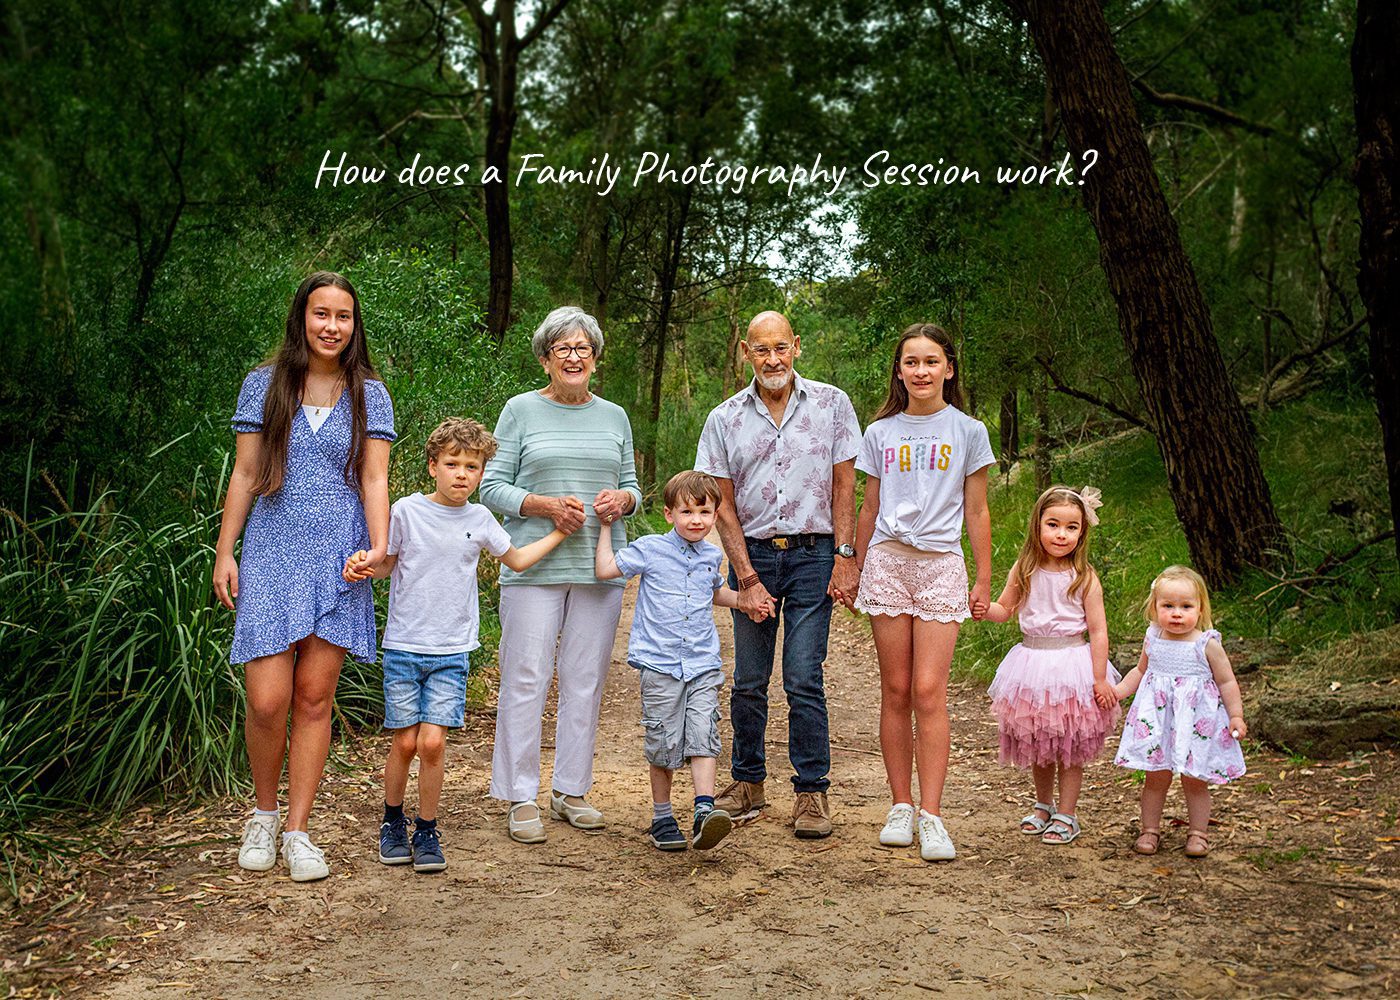 A family photography session with all the generations